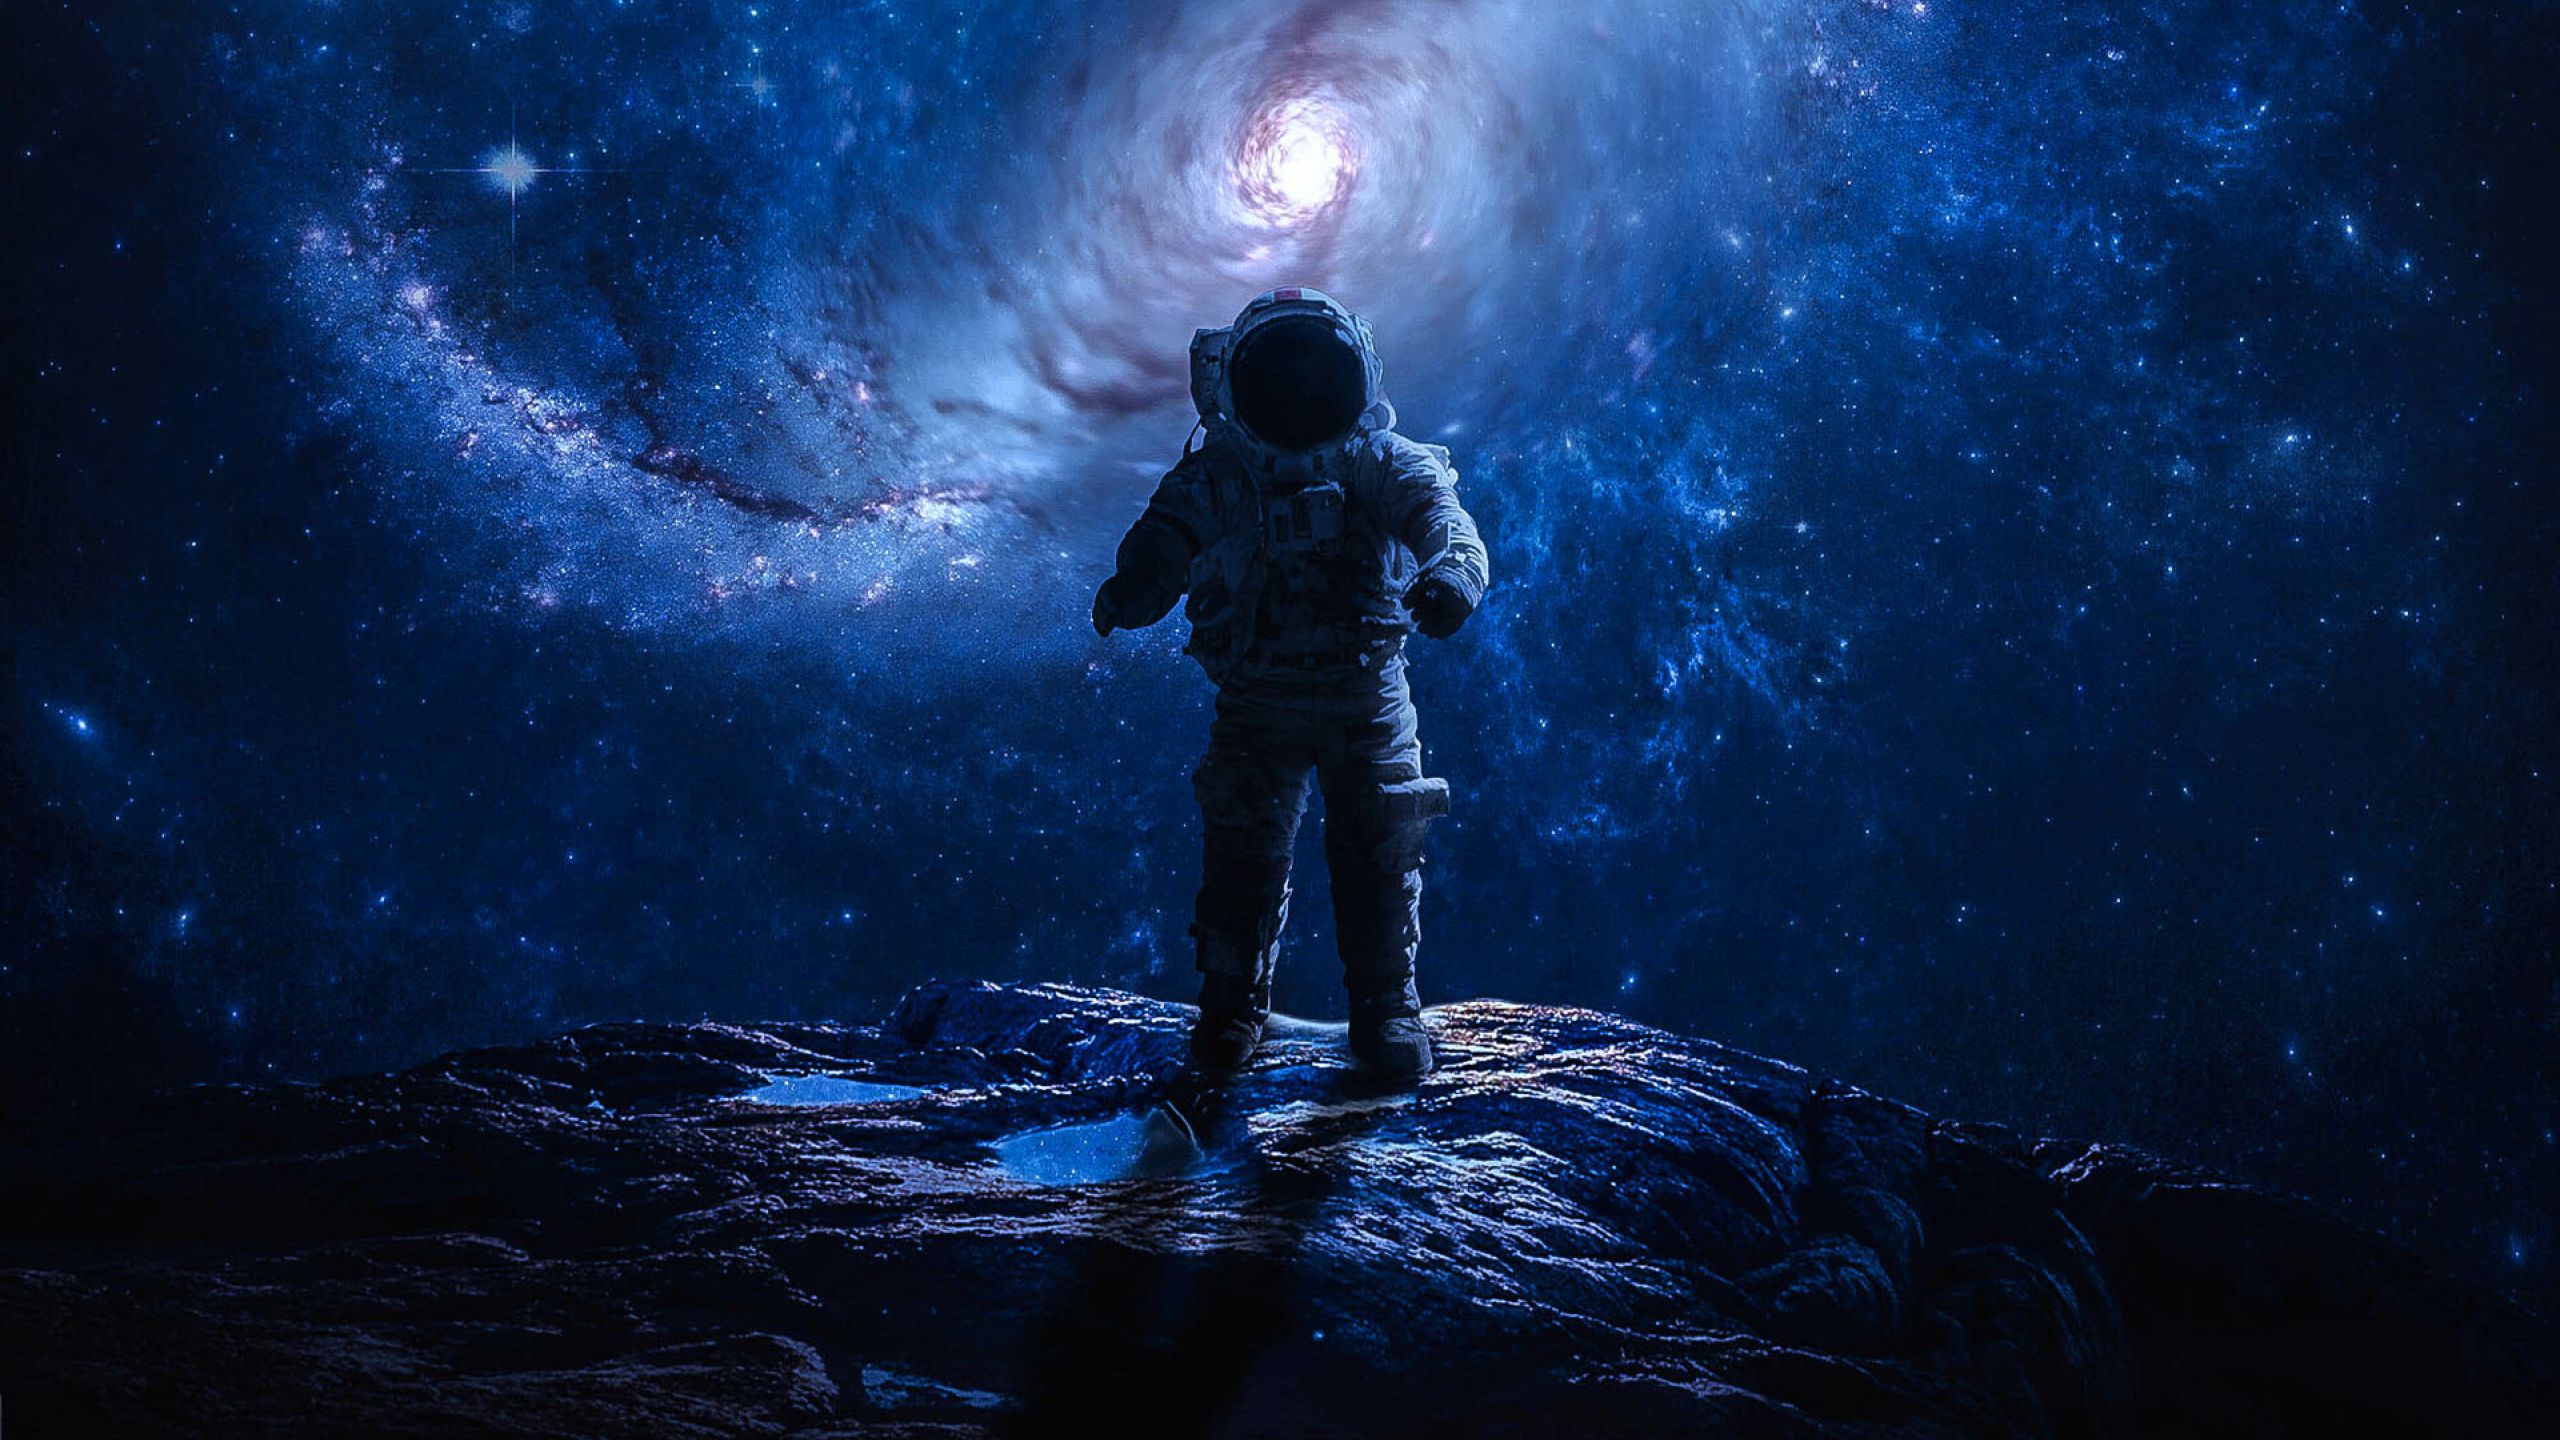 13+] 1440p Space Wallpapers